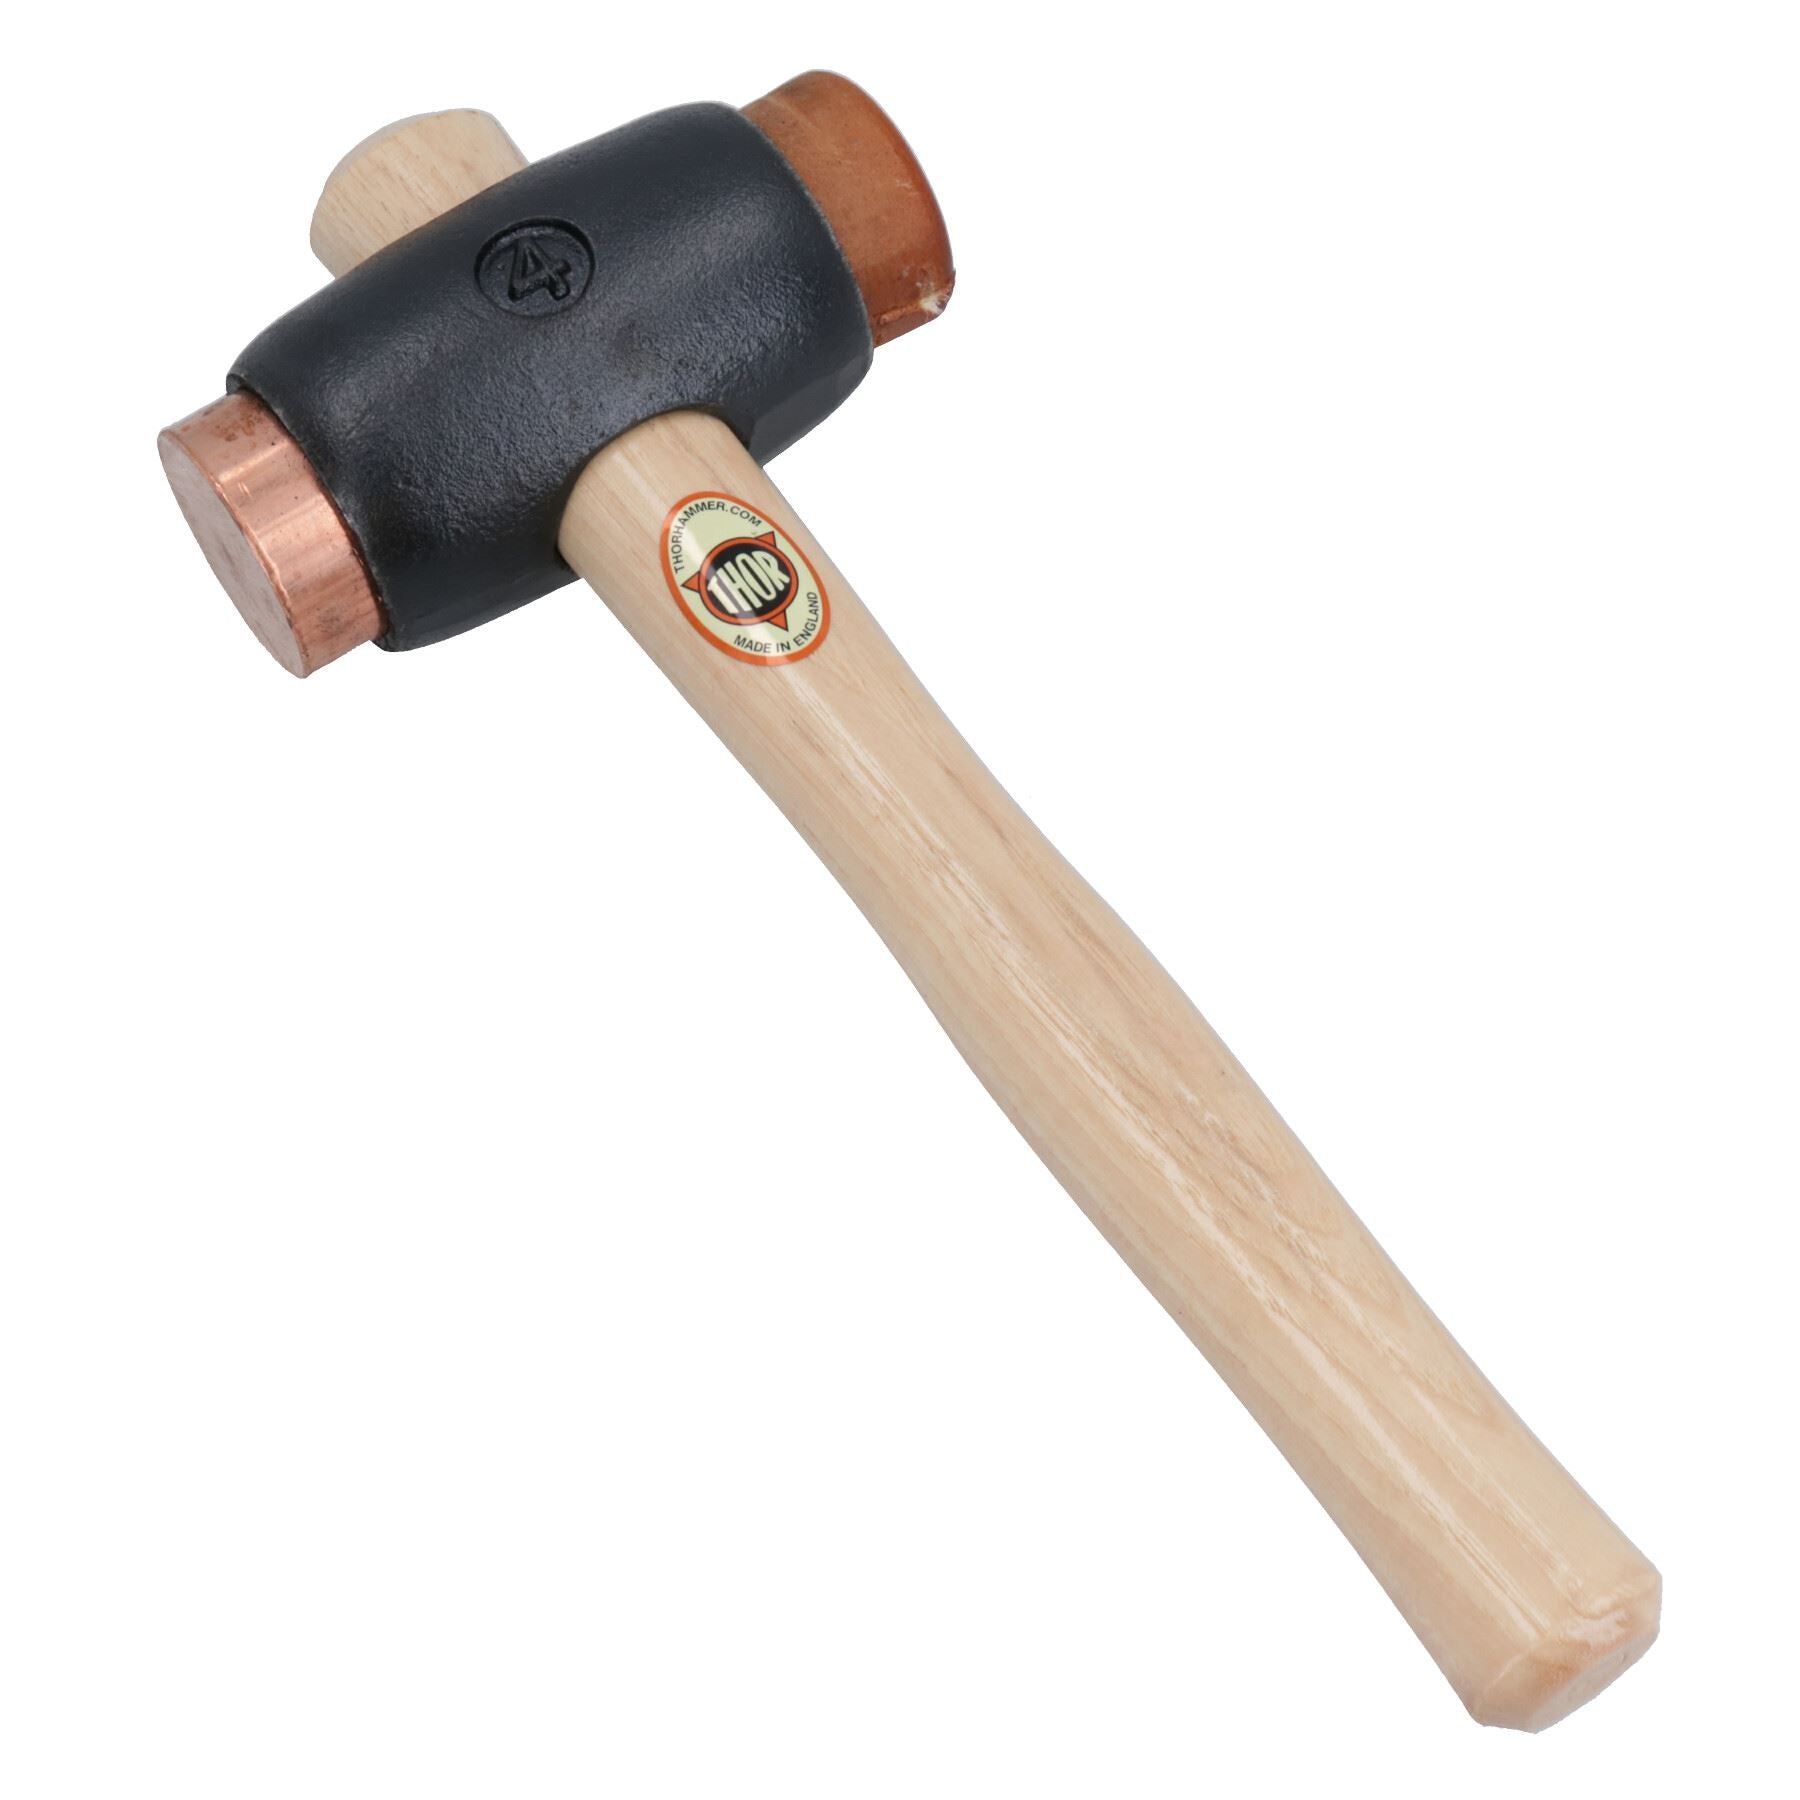 Thor No 1 Copper & Rawhide Faced Hammer / Hide Mallet Dead Blow